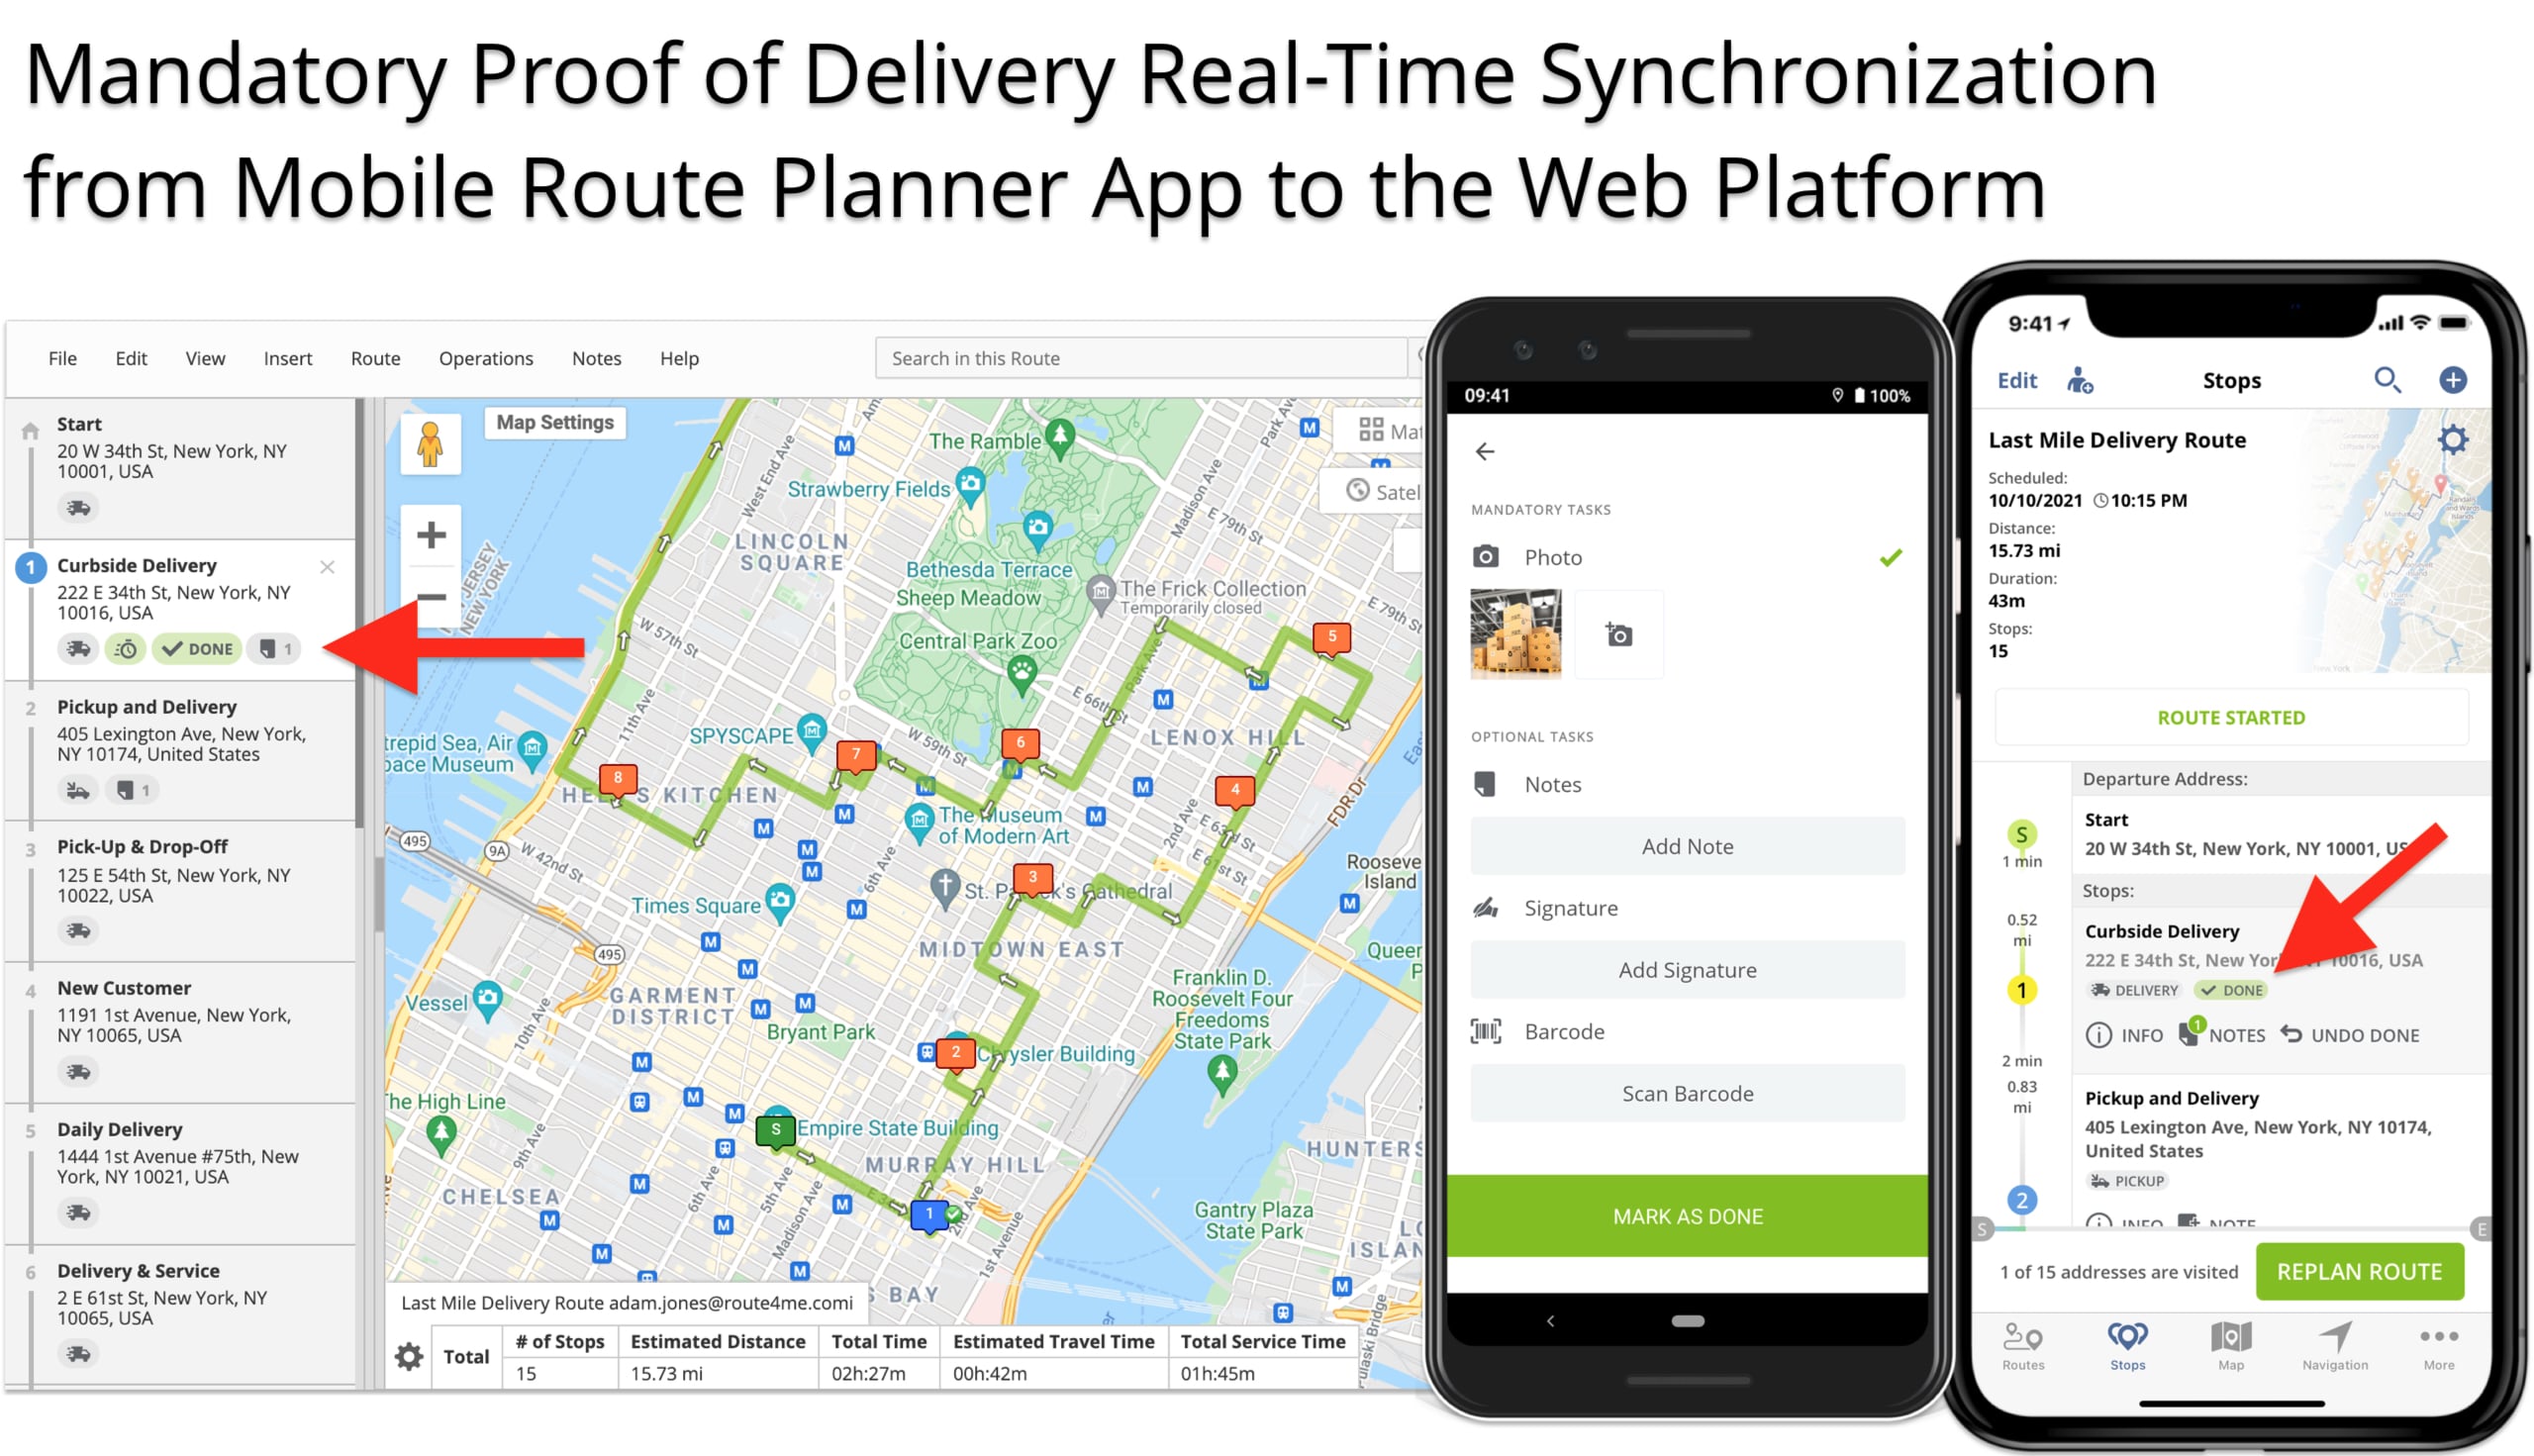 Mandatory signatures, images, and text note proof of delivery mobile to Web synchronization.